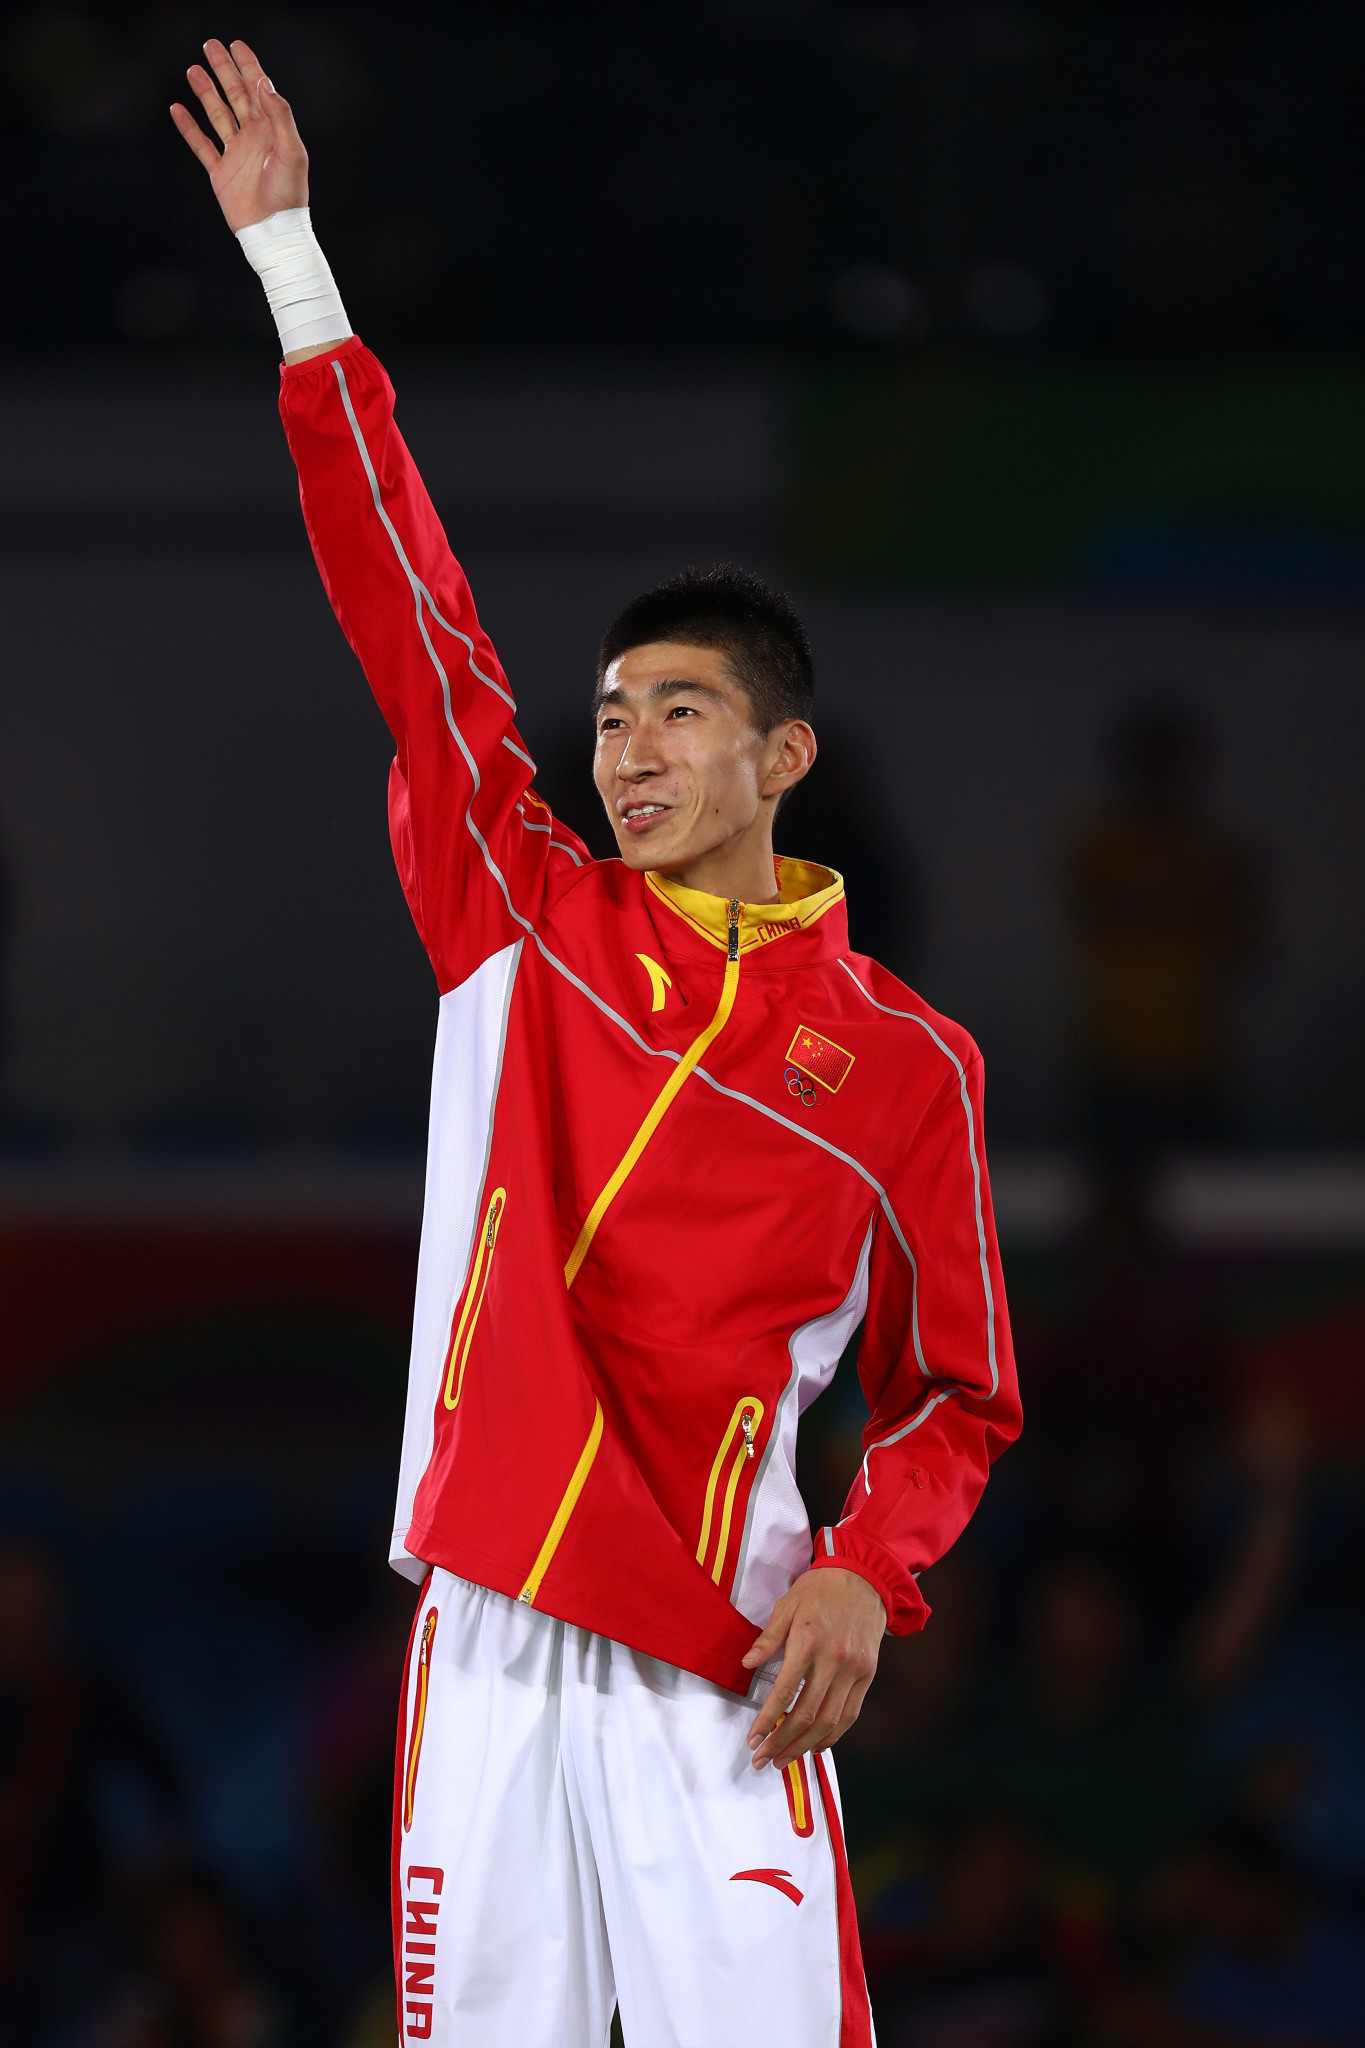 Olympic and world champion Zhao Shuai ended Liberian hopes at the Muju World Championships in 2017 ©Getty Images